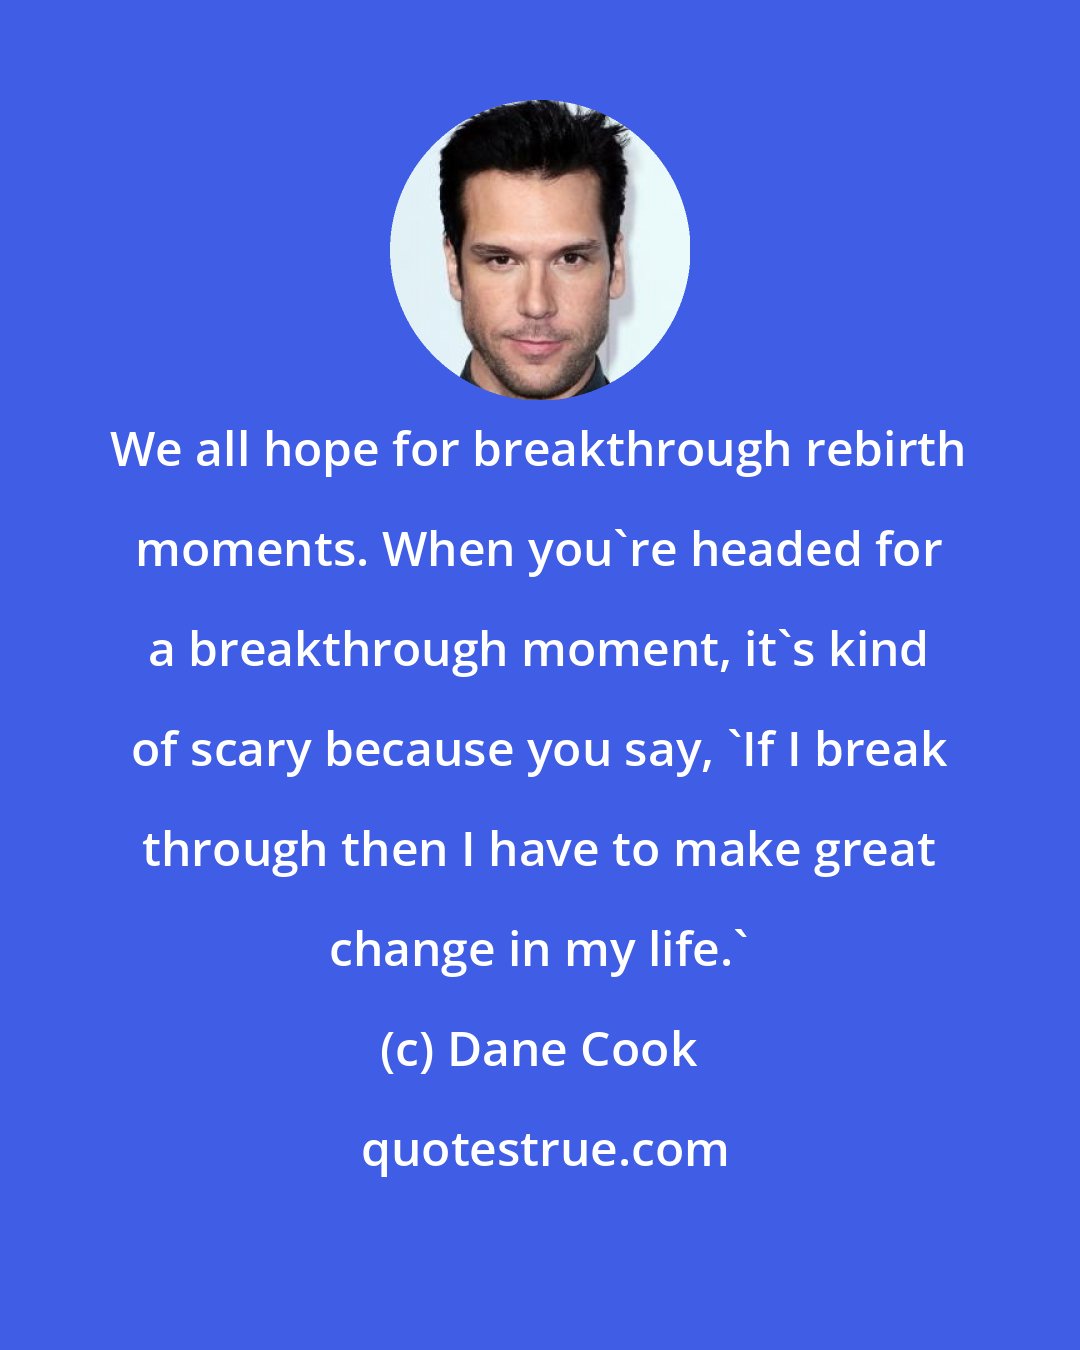 Dane Cook: We all hope for breakthrough rebirth moments. When you're headed for a breakthrough moment, it's kind of scary because you say, 'If I break through then I have to make great change in my life.'